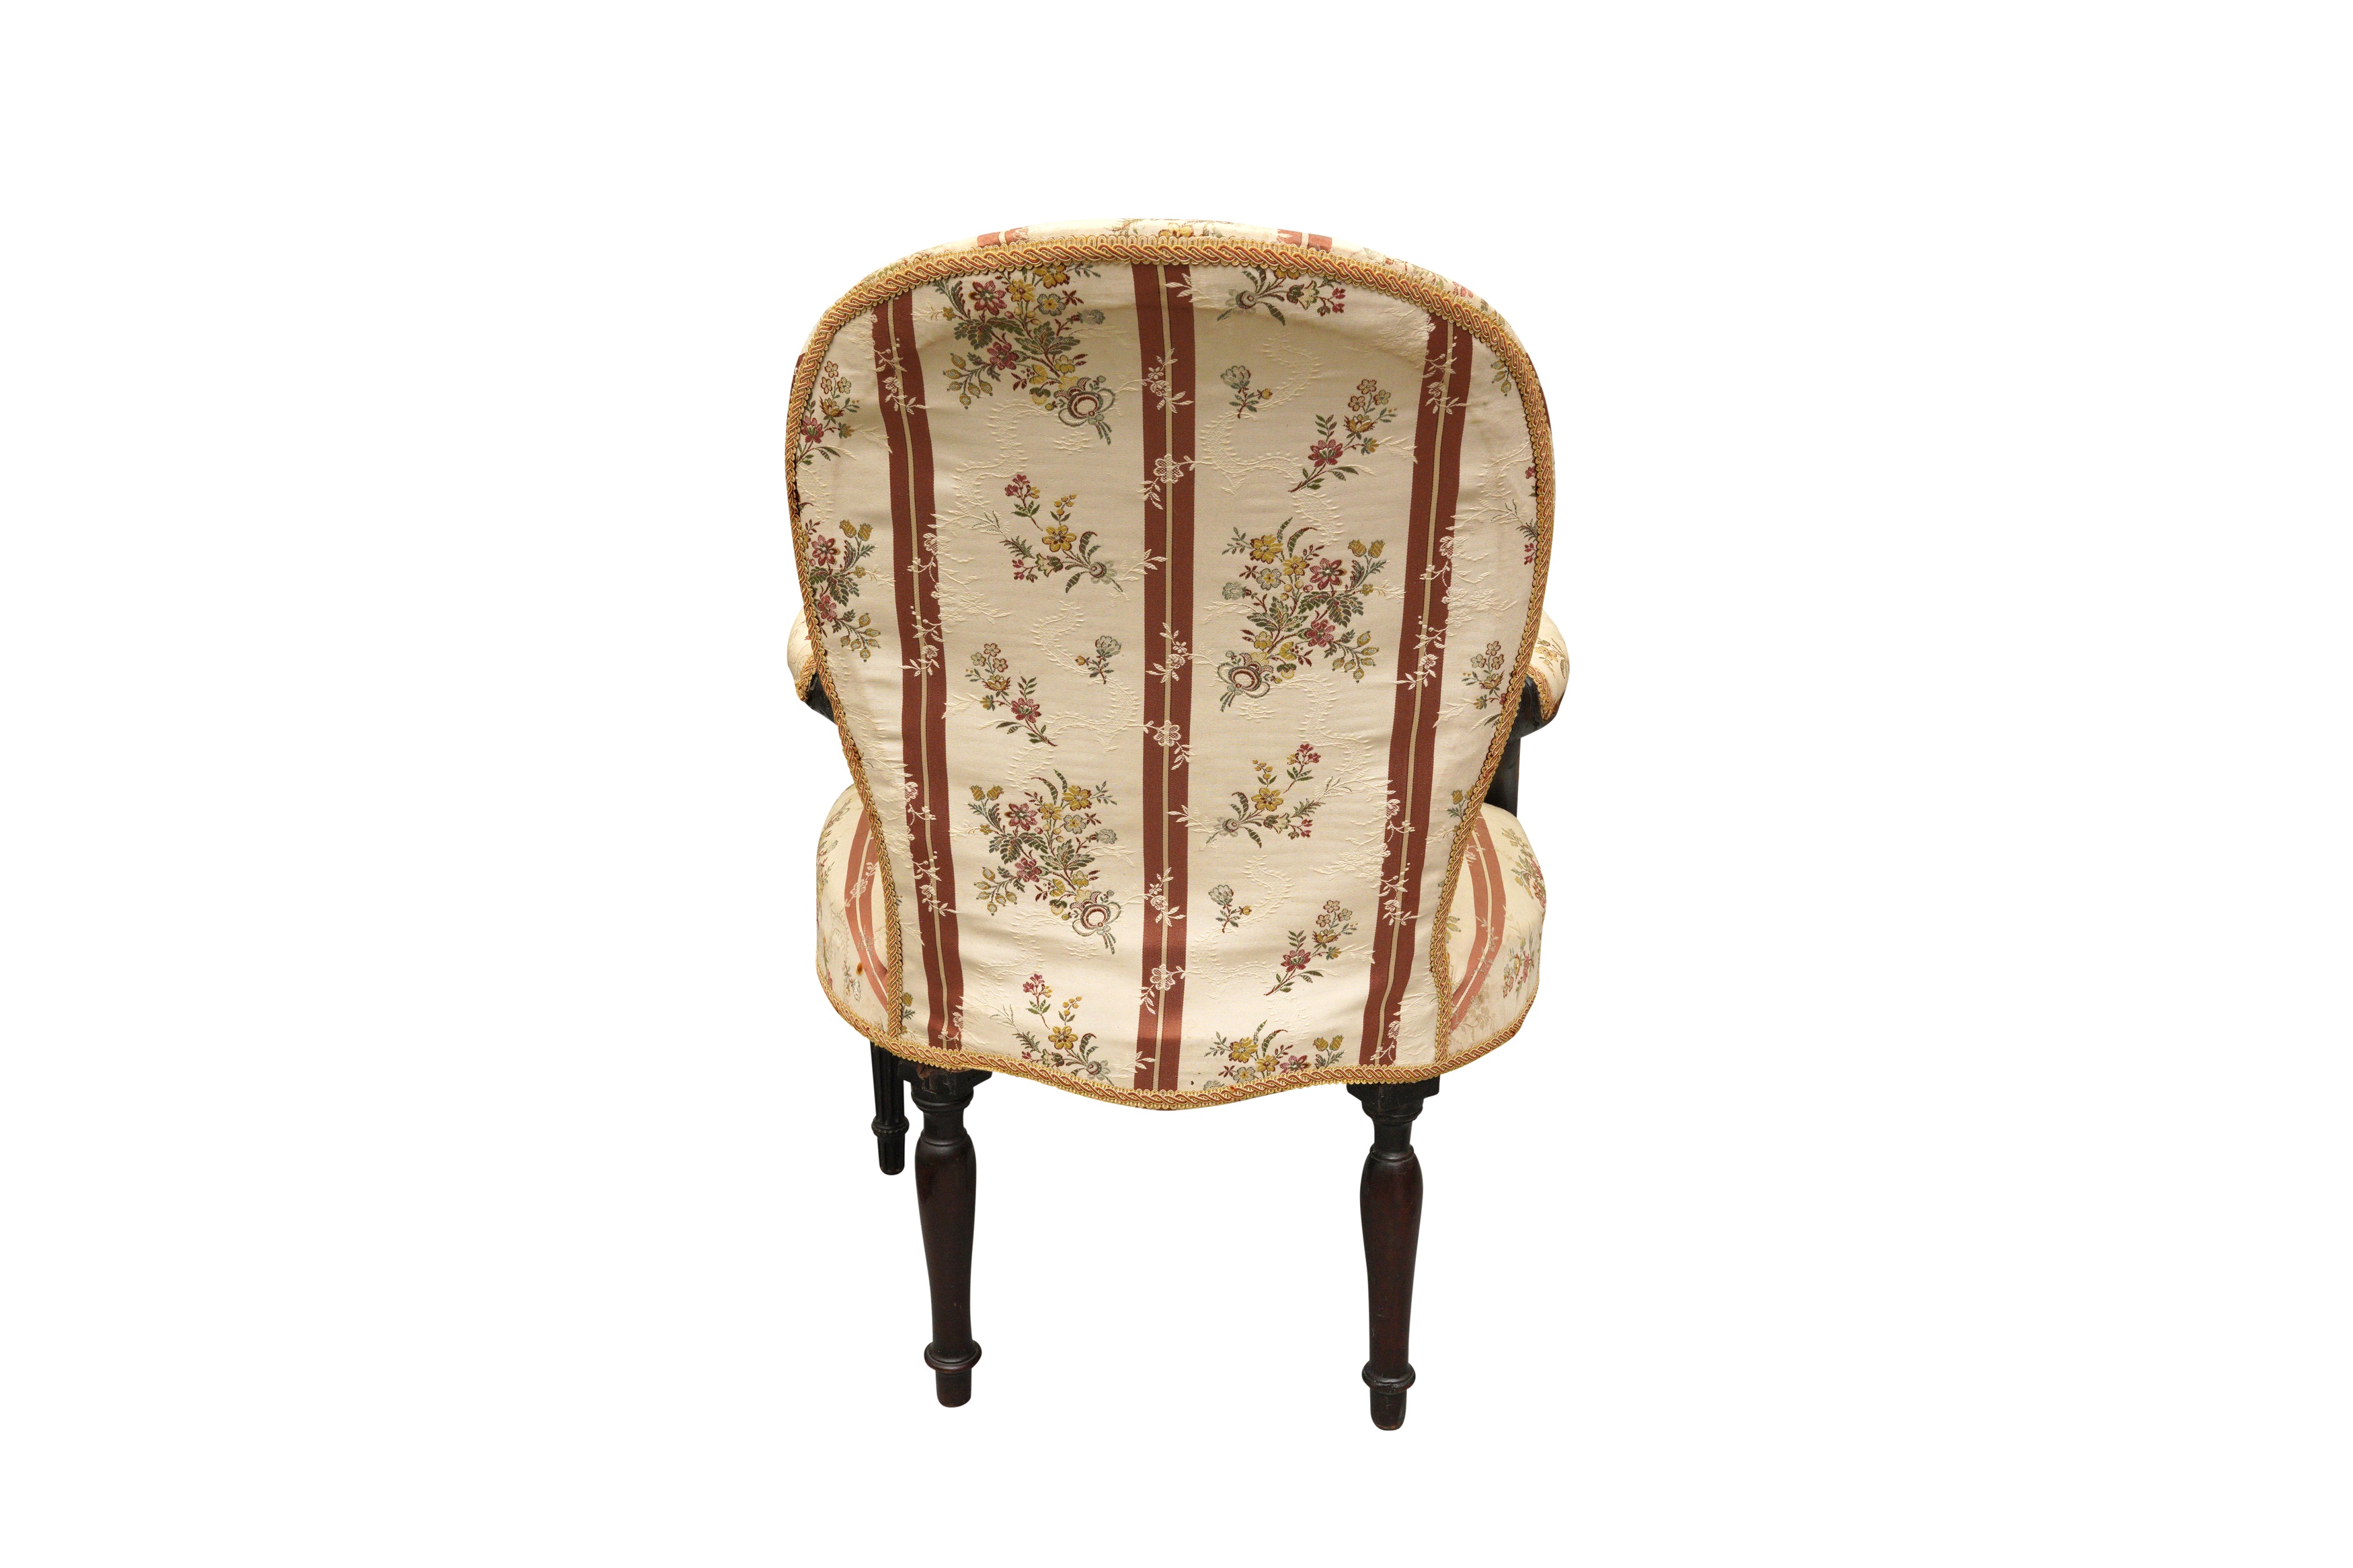 A GEORGE III MAHOGANY AND UPHOLSTERED OPEN ARMCHAIR, CIRCA 1770 - Image 4 of 4